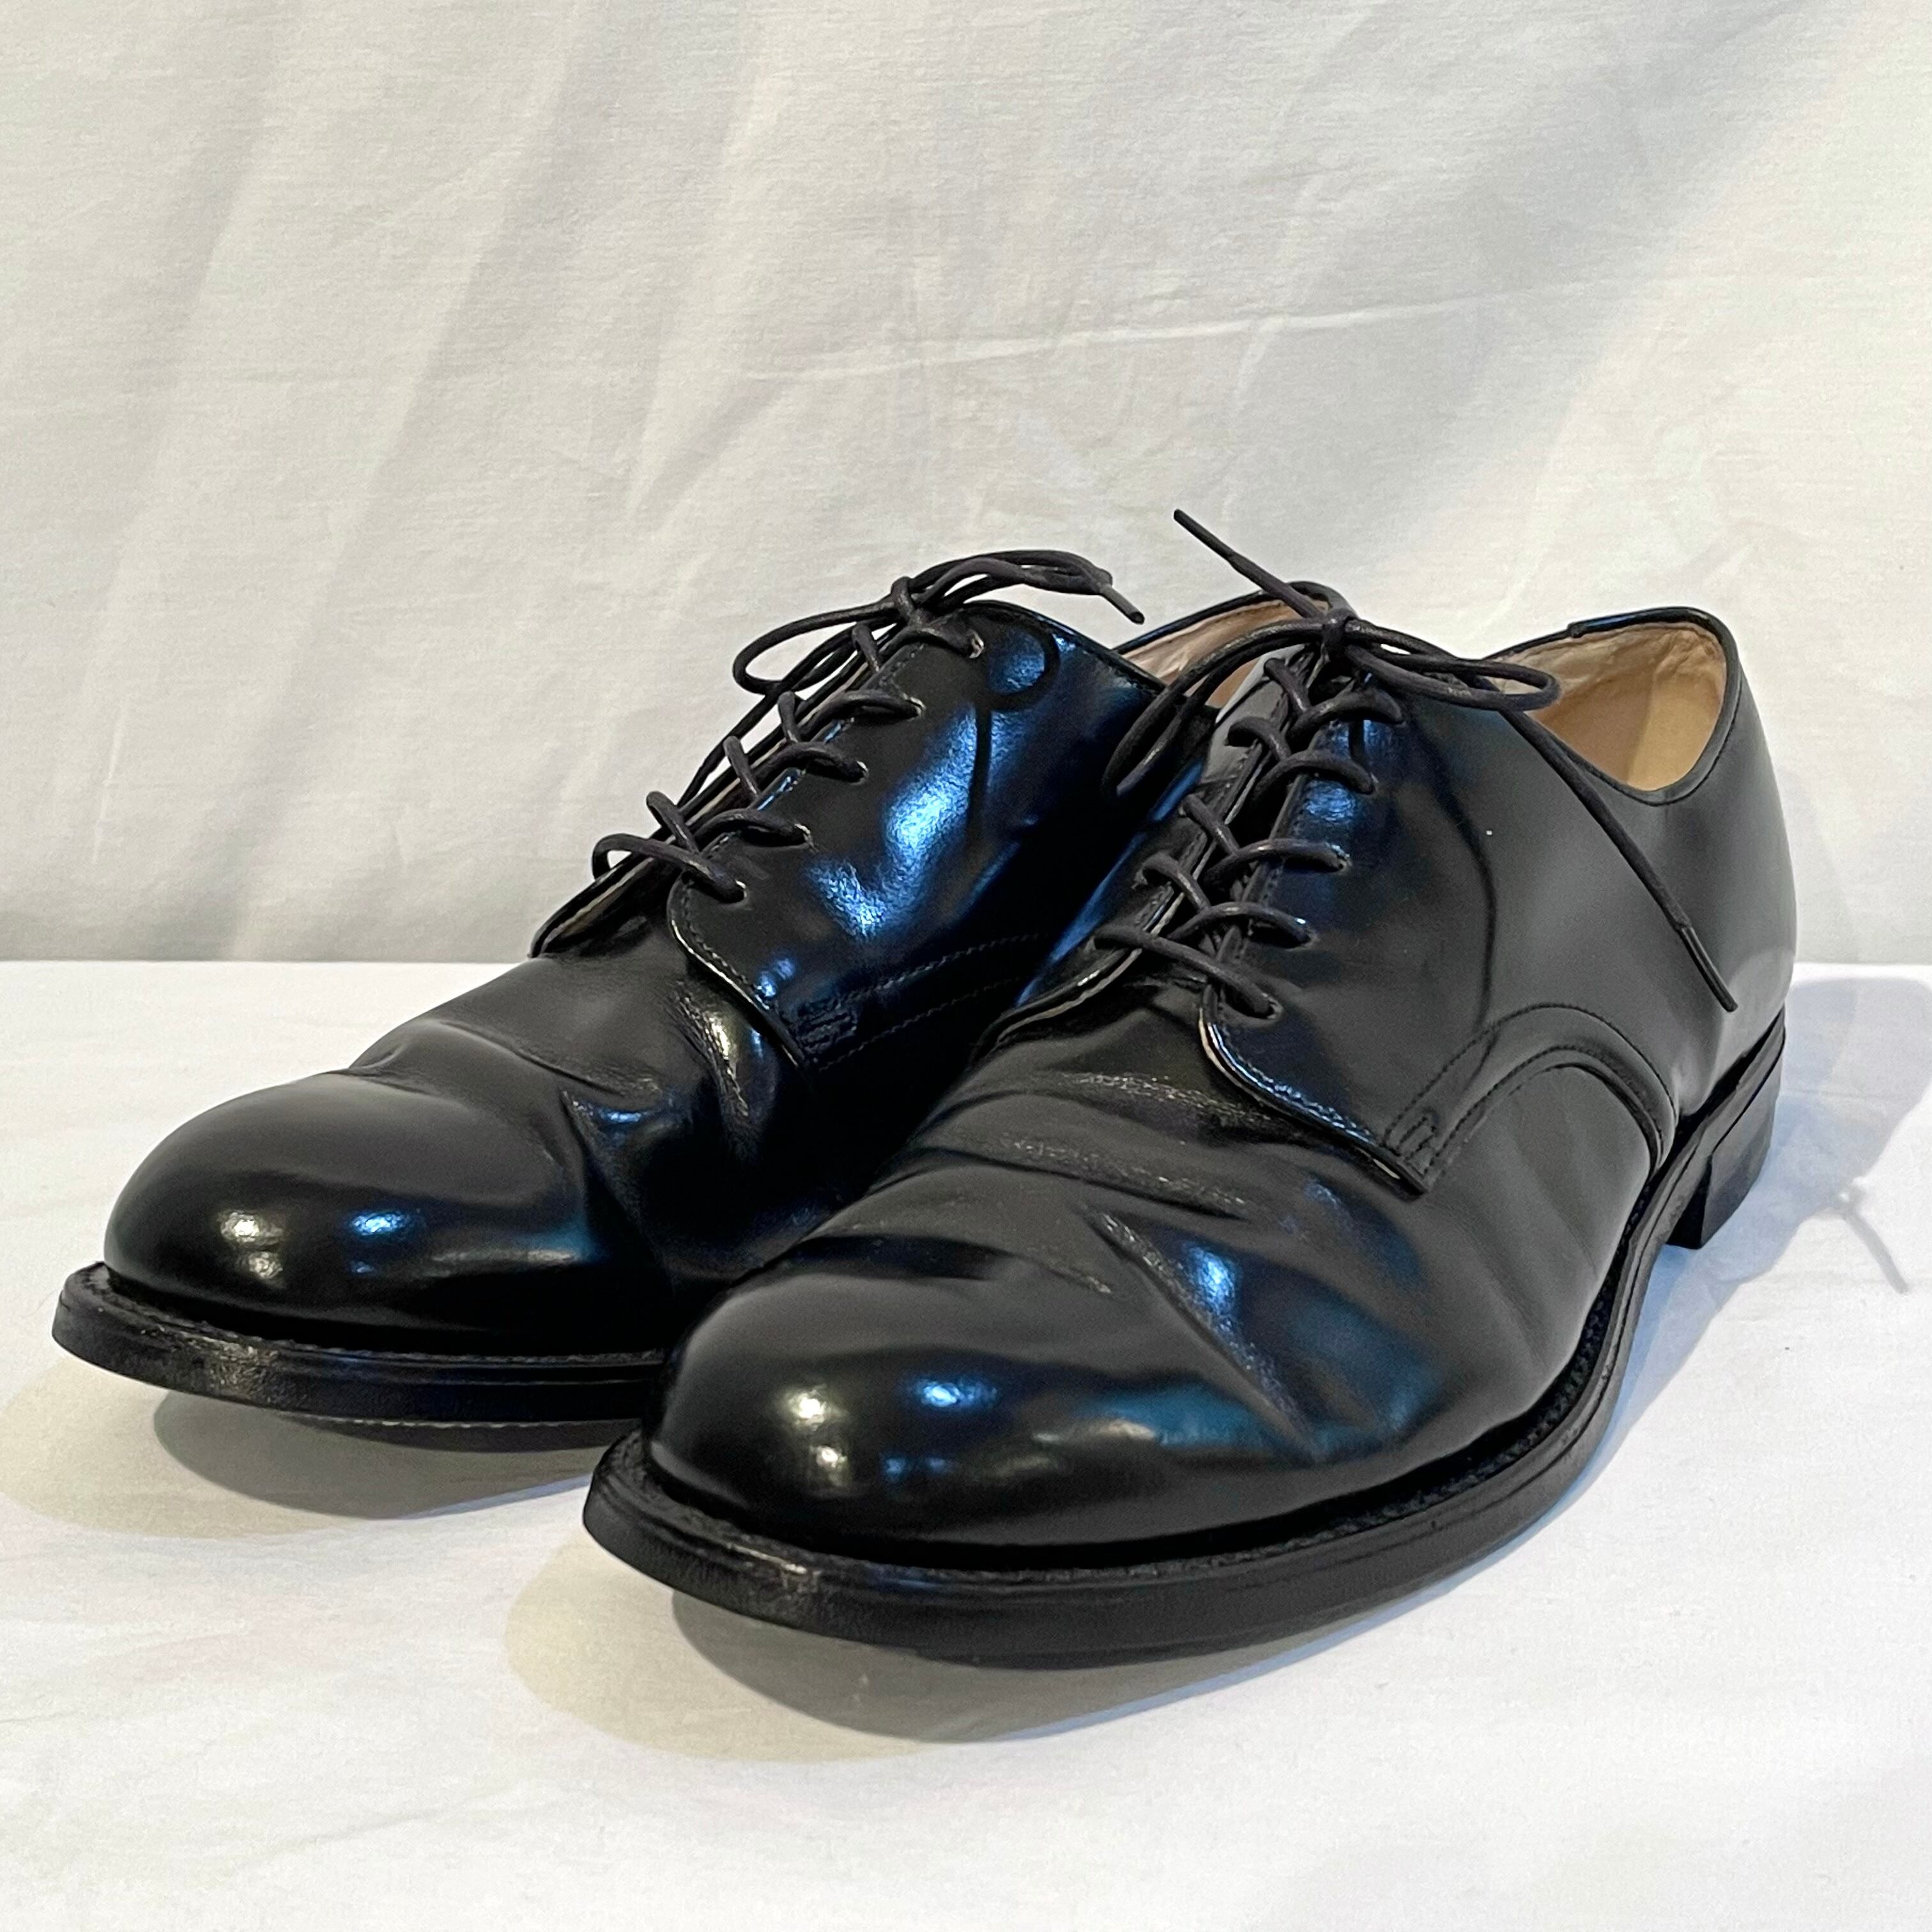 80's U.S.Navy service shoes アメリカ軍 サービスシューズ | CROUT ...